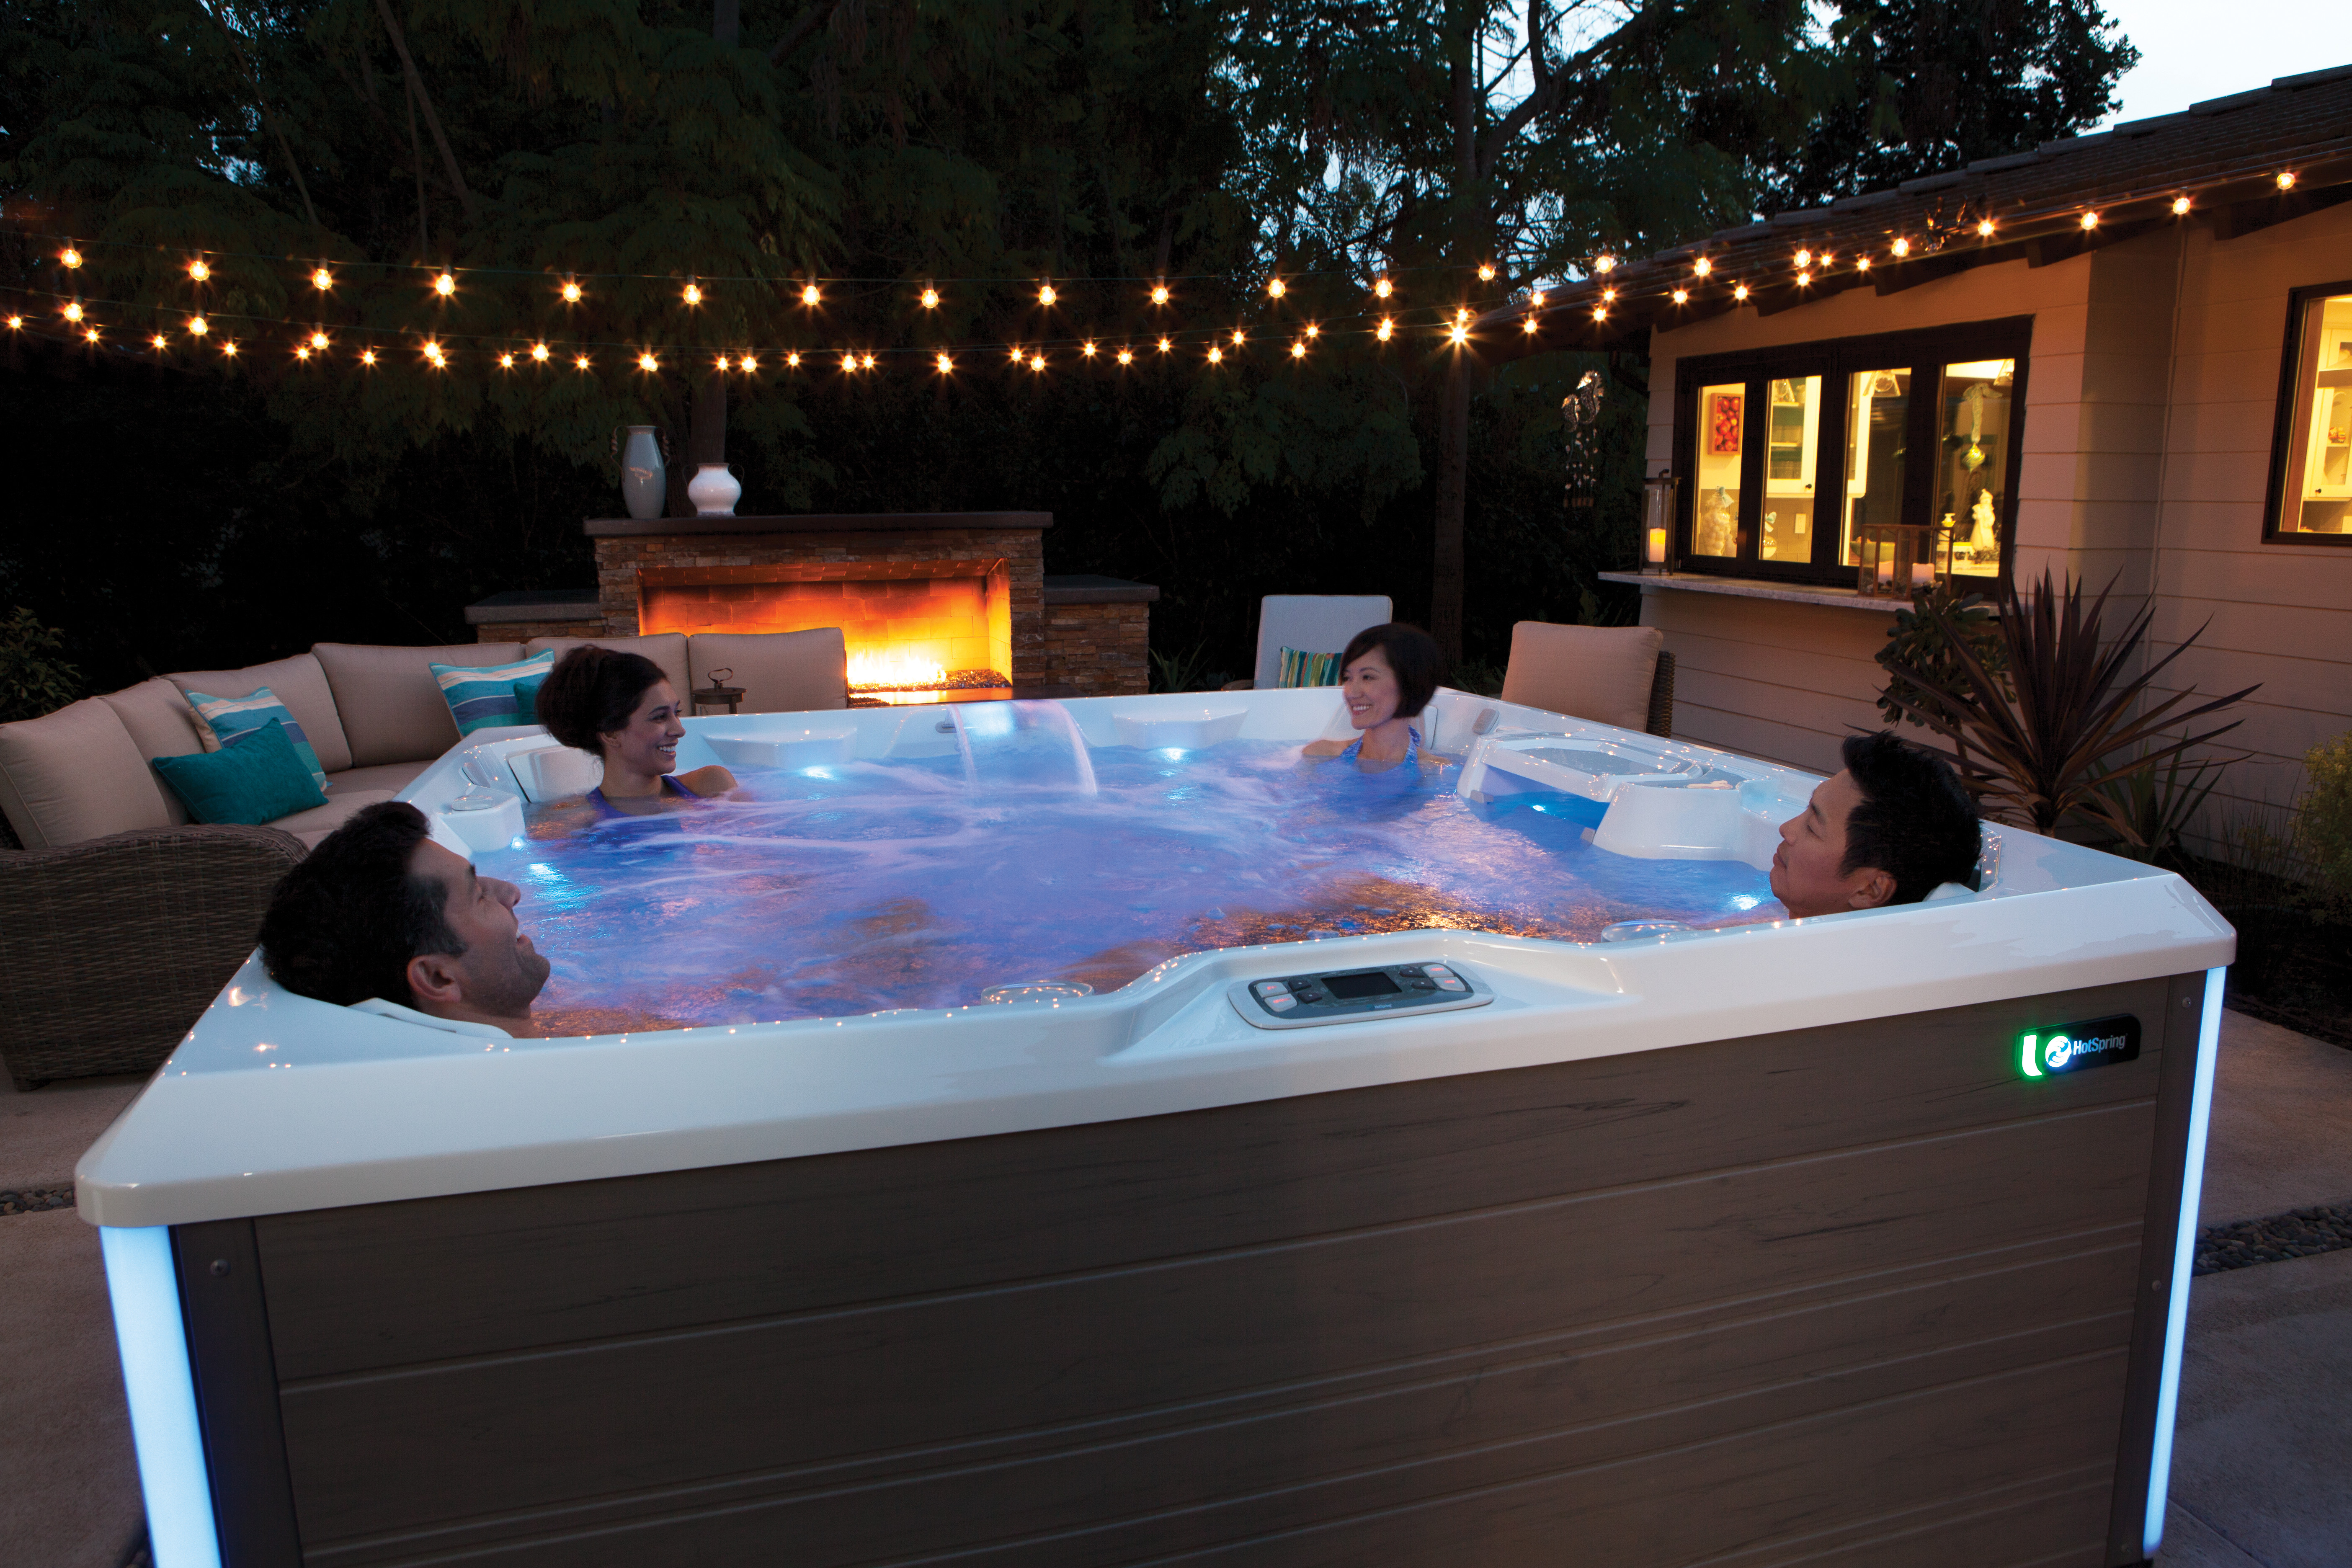 Frequently Asked Questions About Hot Tubs